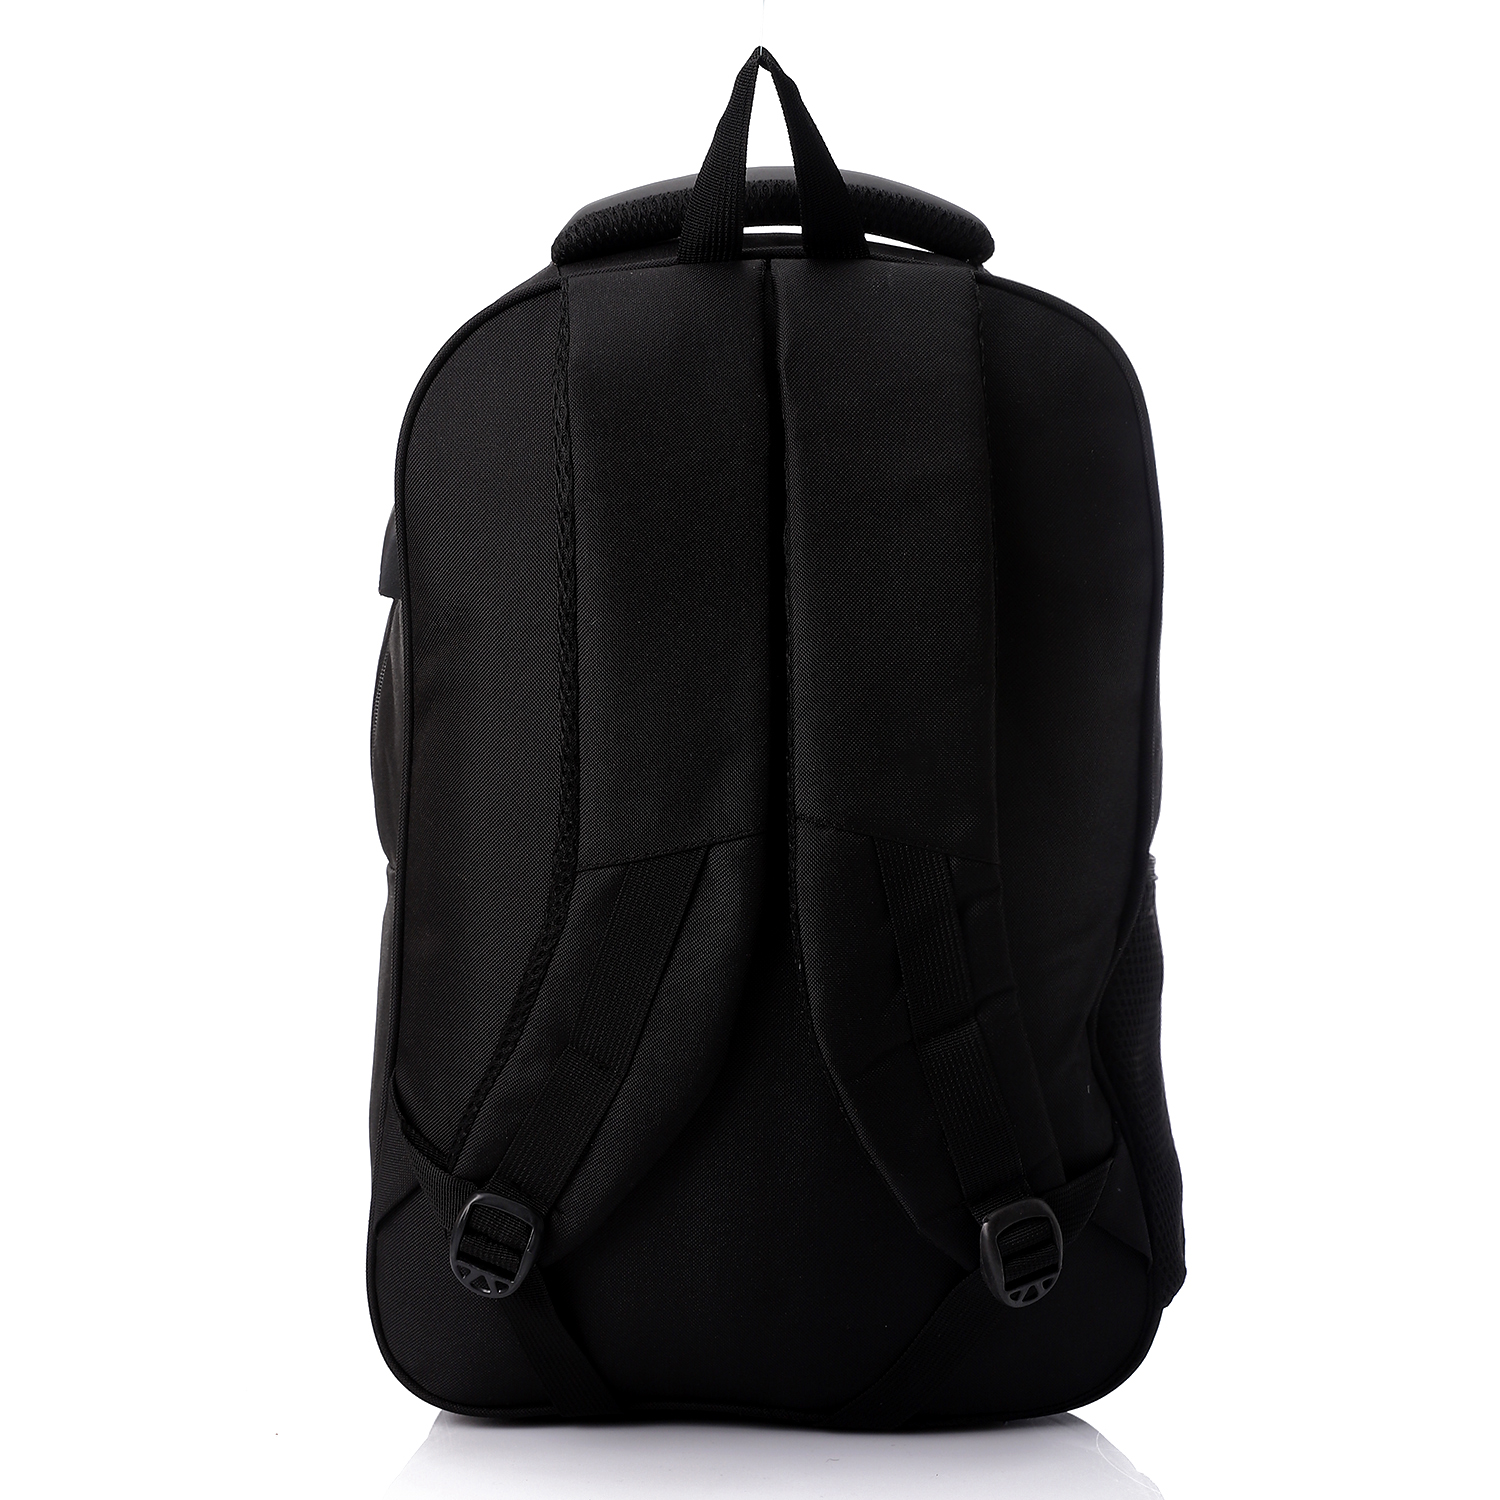 M&O Two Main Compartment Zipped Laptop Bag With USB Cover - Black 